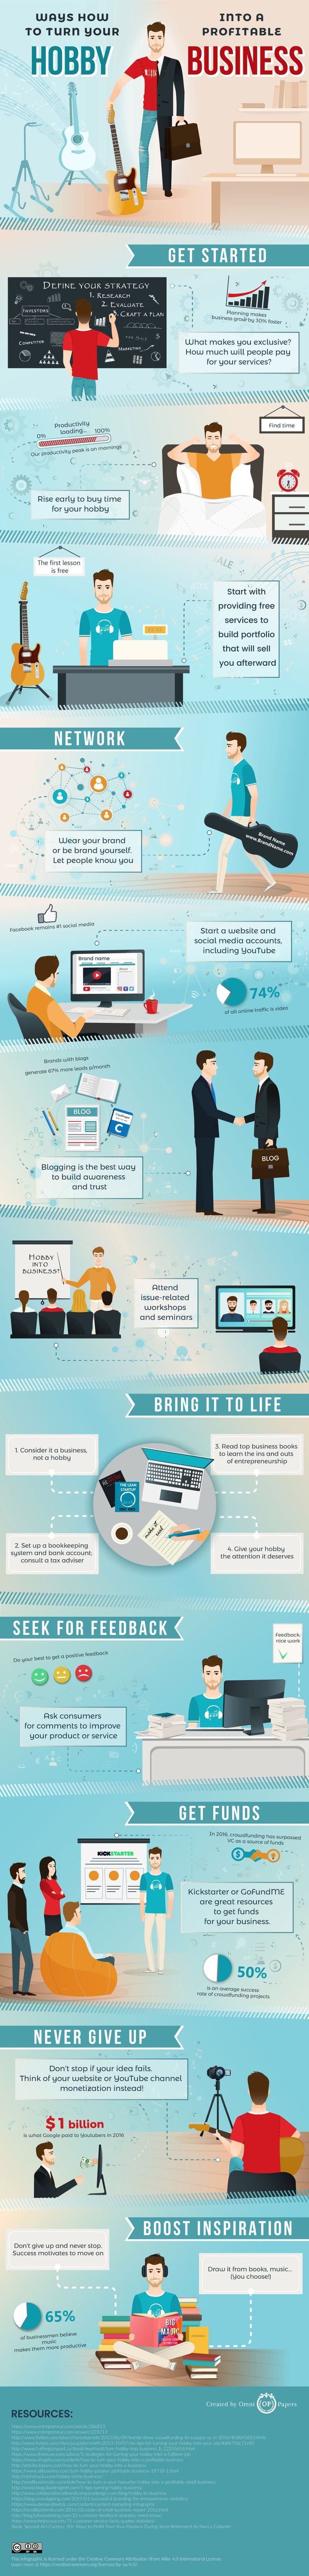 9 Tips to Turn Your Hobby into a Profitable #Business #Infographic #Startup